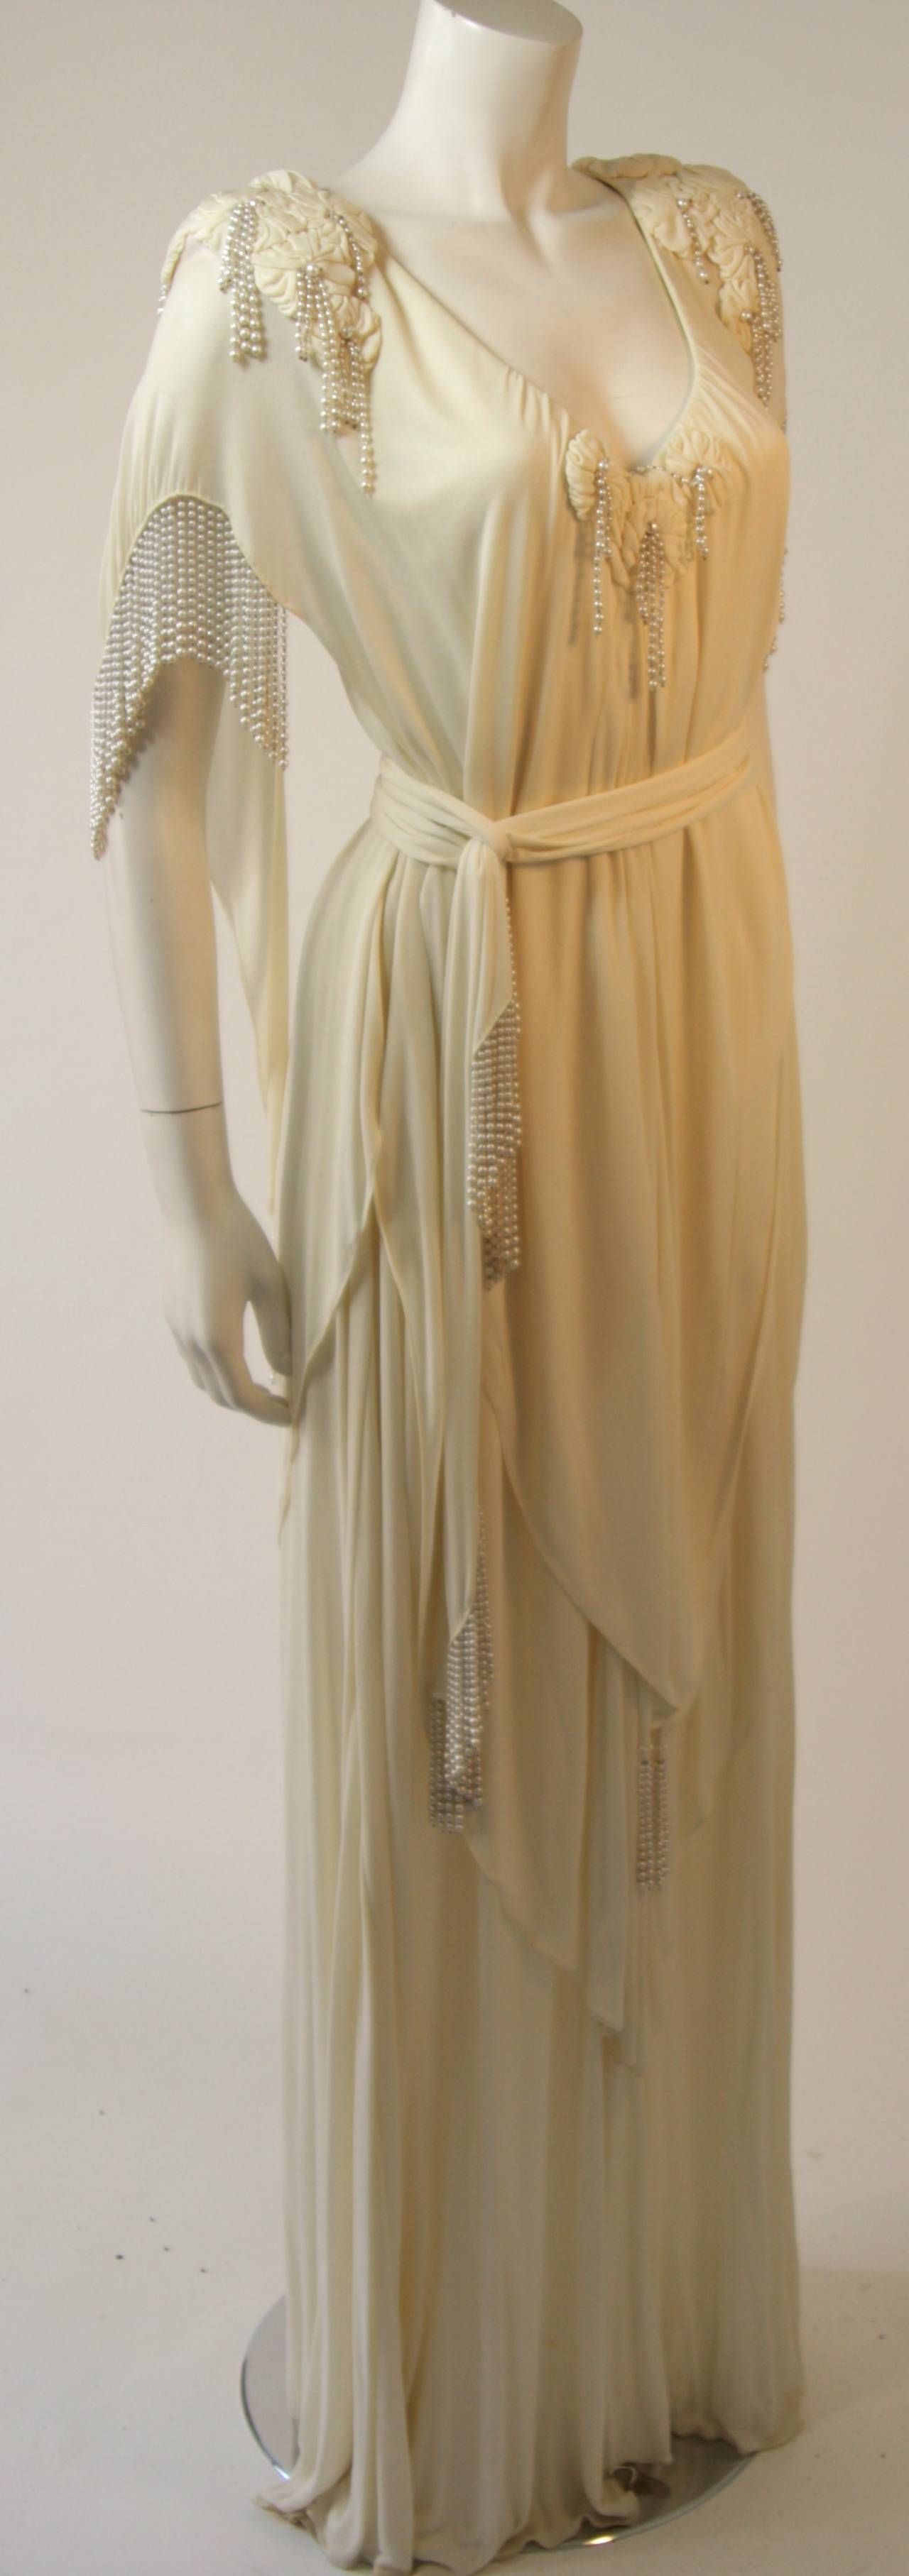 Women's Holly's Harp Off White Jersey Gown with Pearls